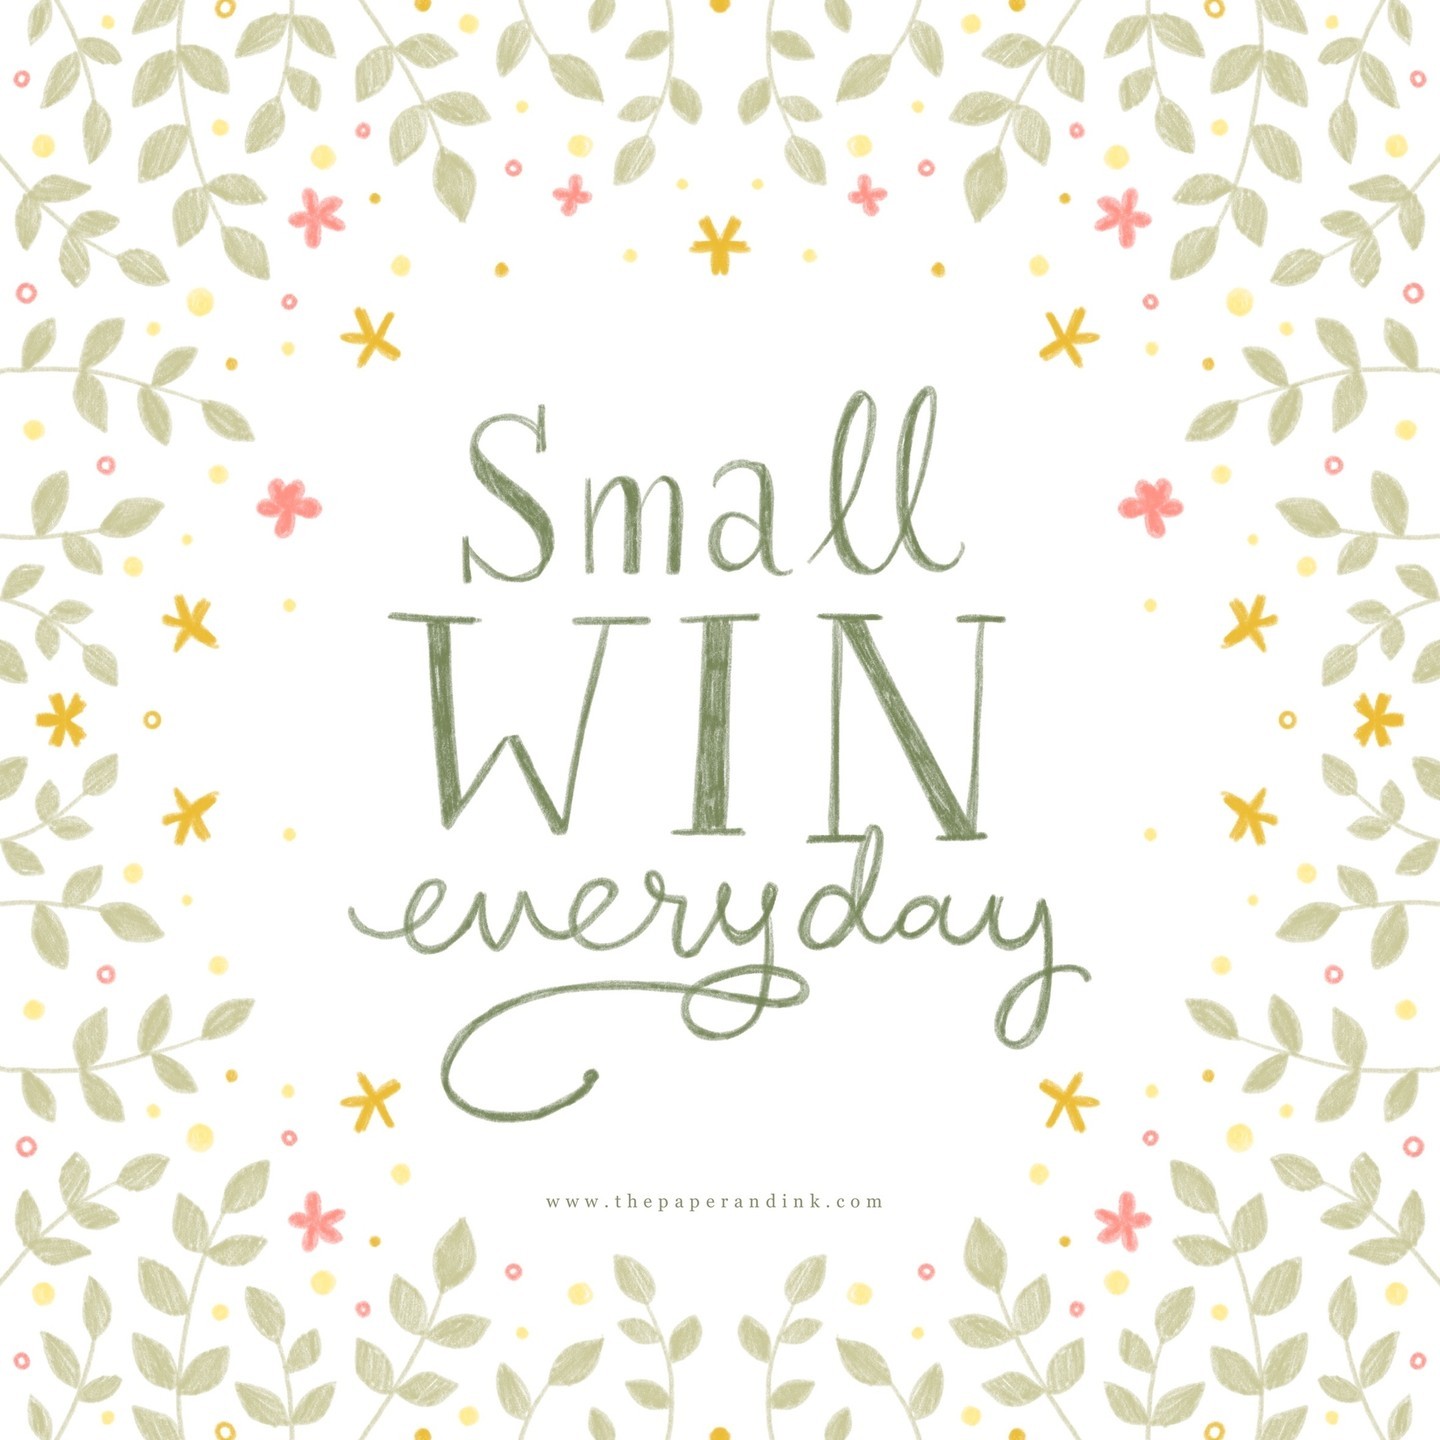 A good old friend of mine told me this a long time ago. I still remember it now, it's a quote that I hold dear 🥰⁠
⁠
Small win every day.⁠
⁠
Instead of focusing too much on a big win that seems too far ahead, a small win every day could be something that will be much more rewarding.⁠
⁠
We were actually talking about going to the gym, so she mentioned just going to the gym, it's a small win for her that day.⁠
⁠
So it could be something very simple, something good that you unconsciously do as a routine, but because you do it every day, it loses its value. Think of it more, it could be drinking 6 cups of water a day, it could be doing house chores, taking the dog for a walk.⁠
⁠
Be grateful for your every day 🥰⁠
⁠
#thepaperandink